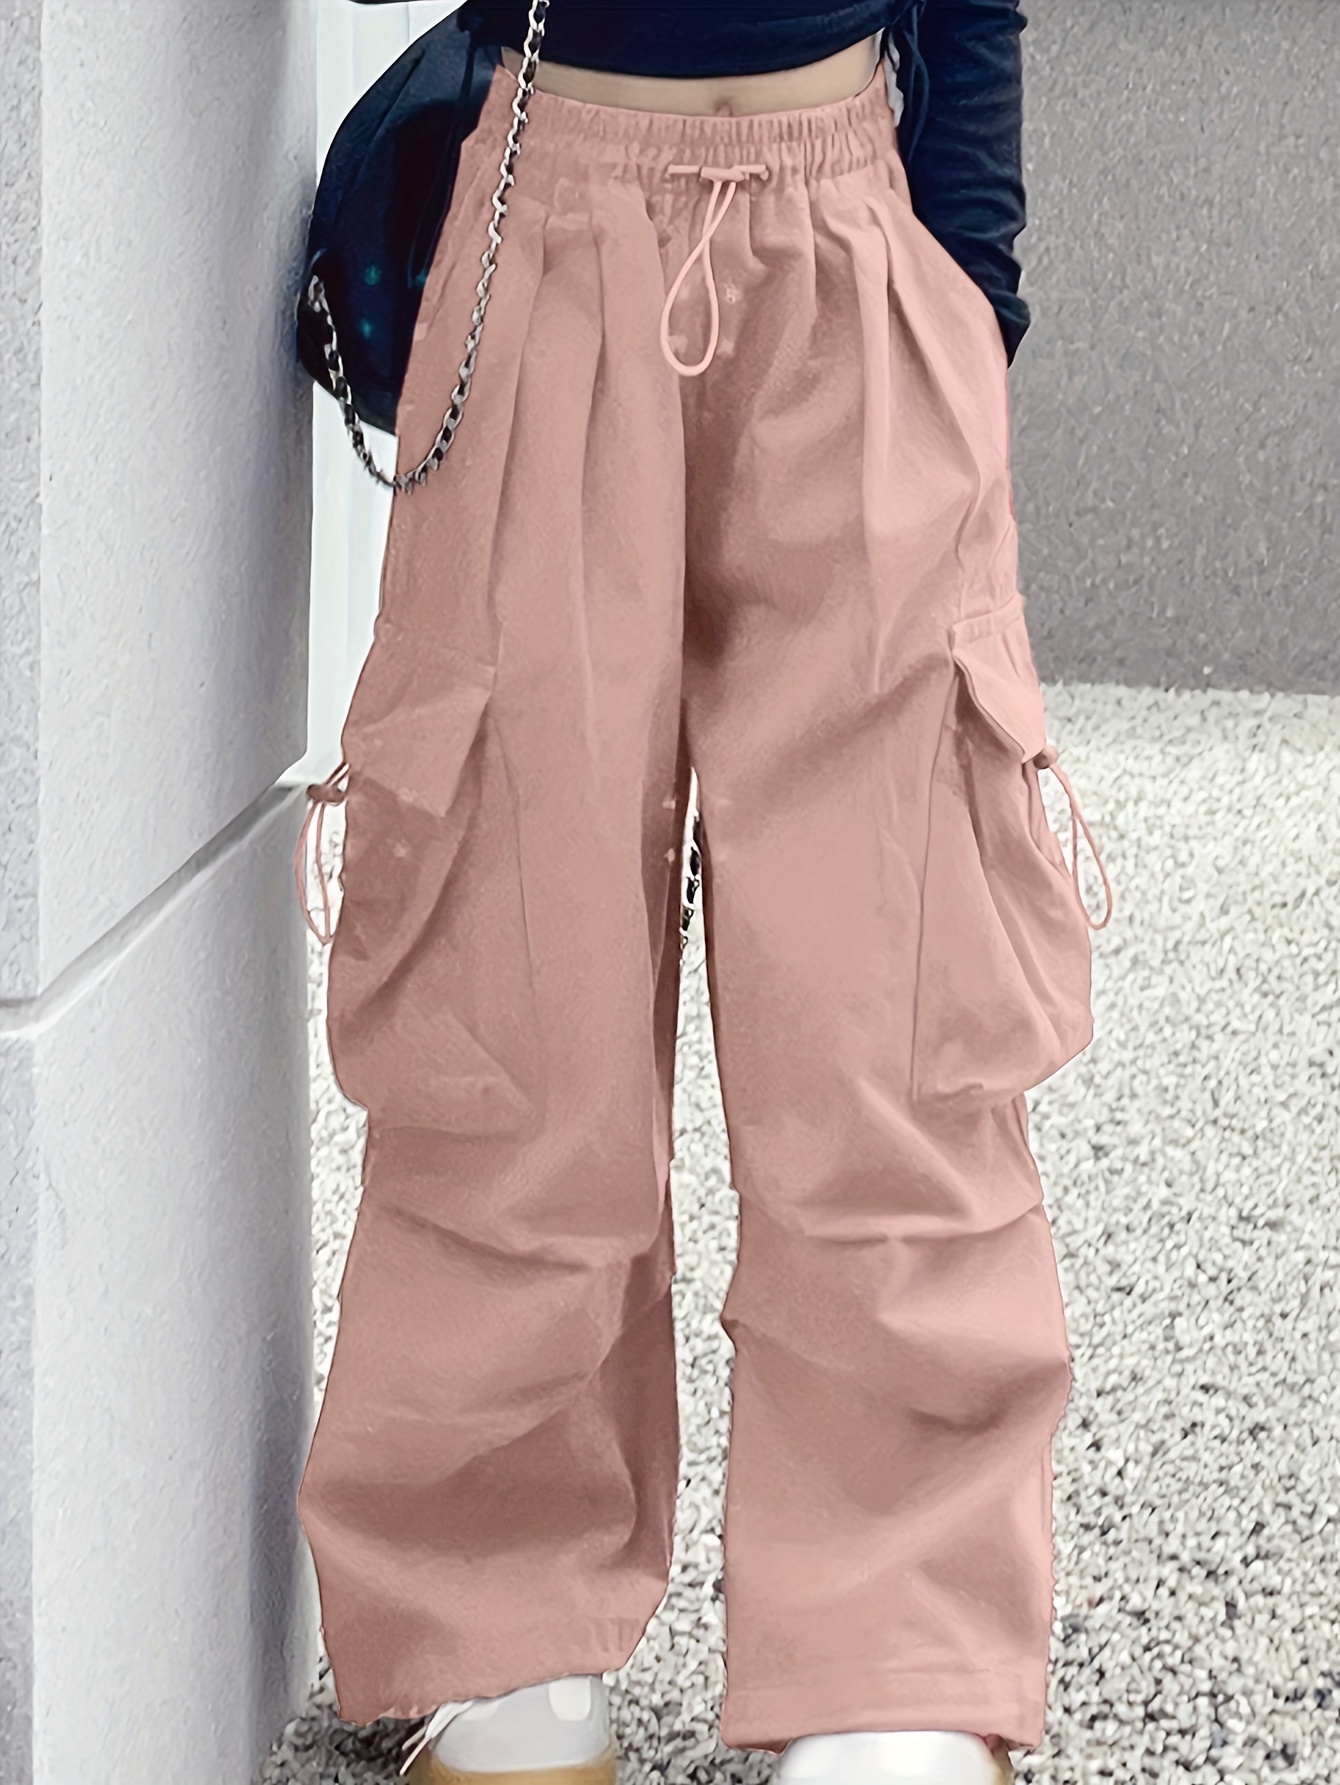 Young Girls Jeans Fashion Loose Wide Leg Trousers for Kids Spring School  Children Clothes 6 8 10 12 13 Years Korean Dance Pants - AliExpress